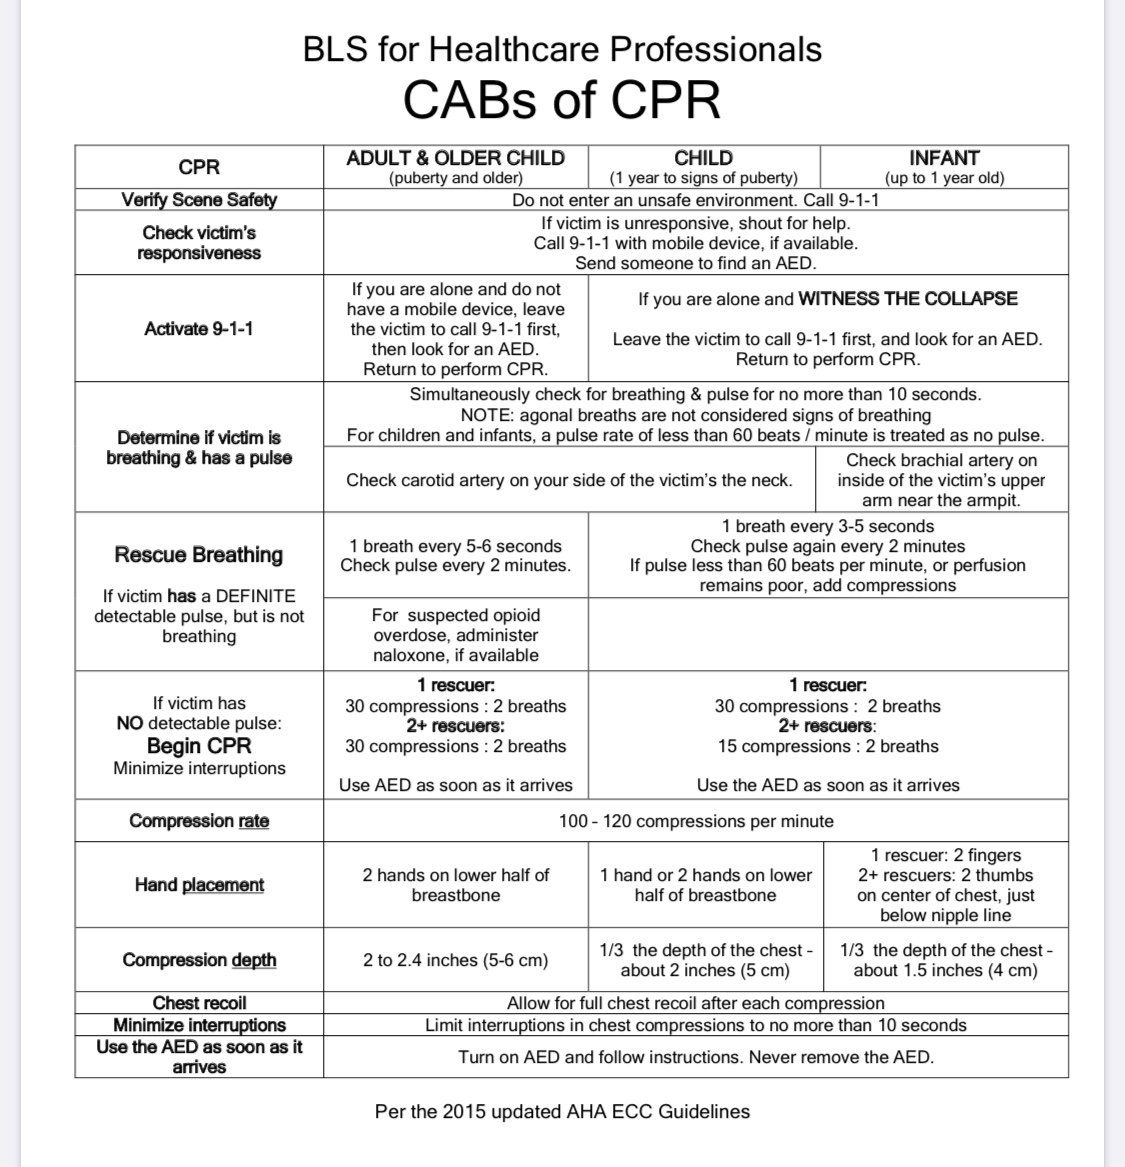 CPR Cheat Sheet www.cprblspros.com